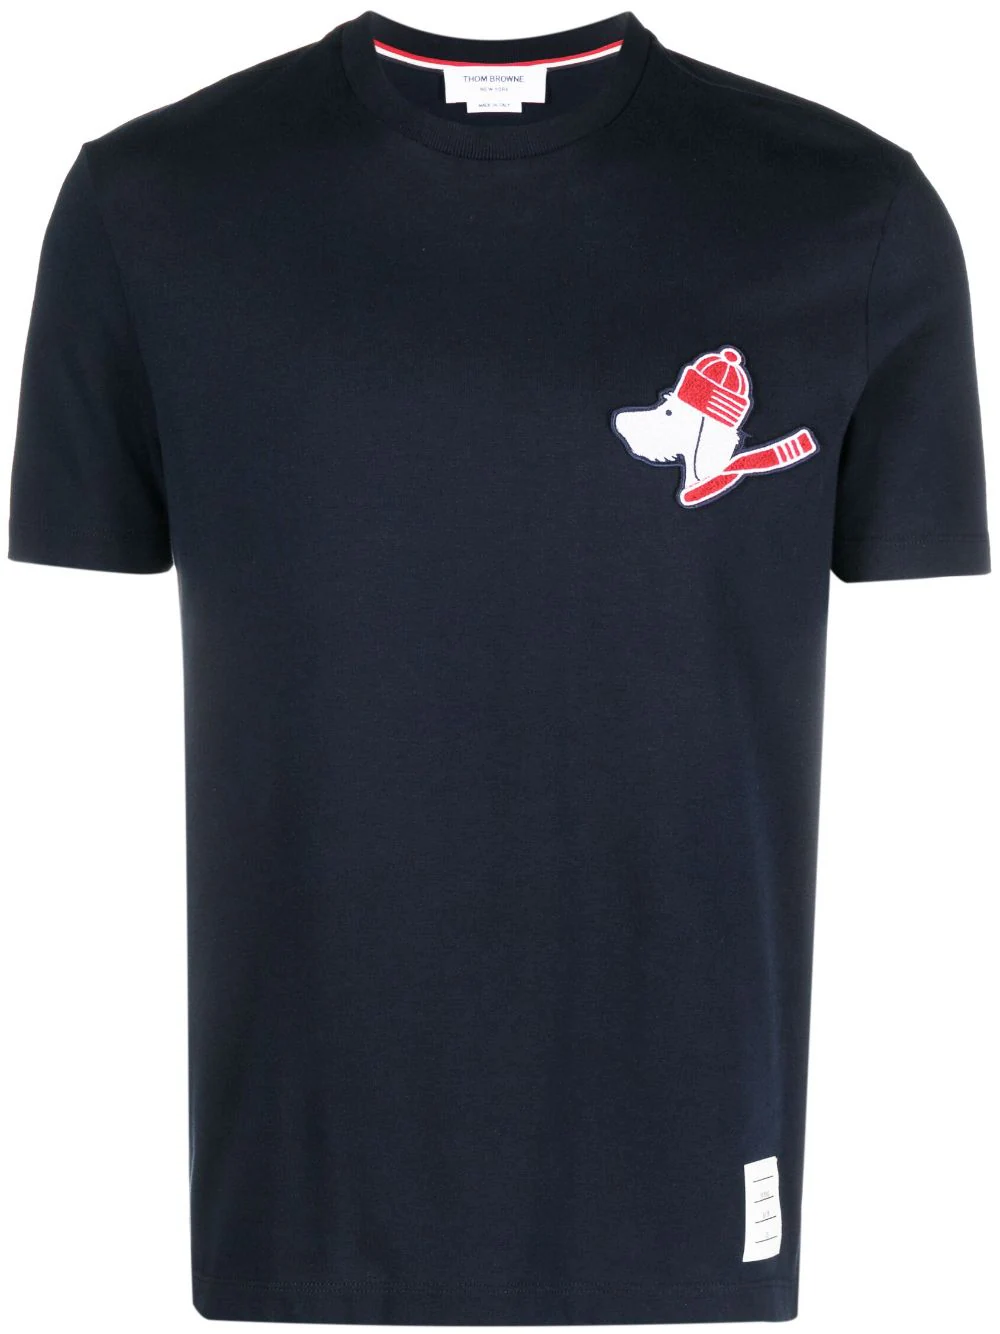 Short Sleeve Tee W/ Hector W/ A Hat Chenille Embroidery In Med Weight Jersey Navy